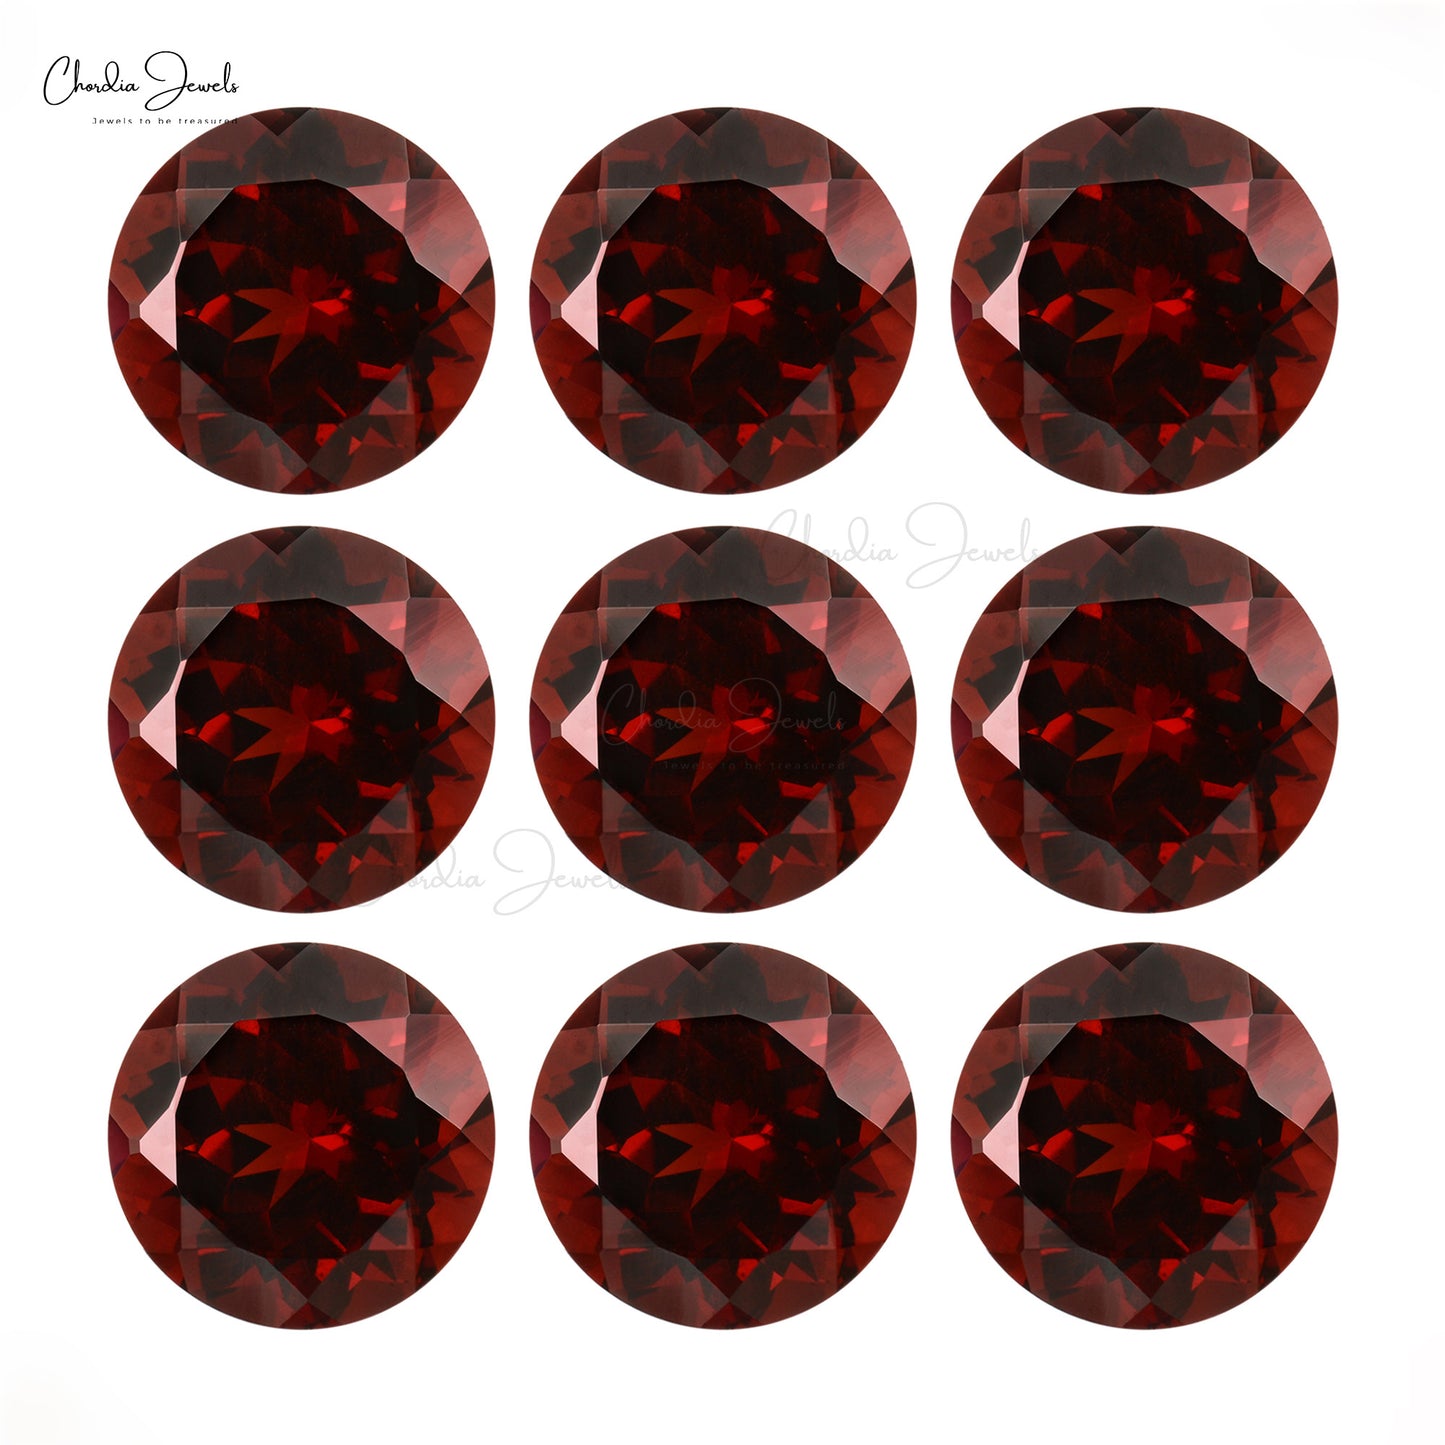 High Quality Red Garnet 7mm Round Cut Gemstone for Engagement Ring, 1 Piece